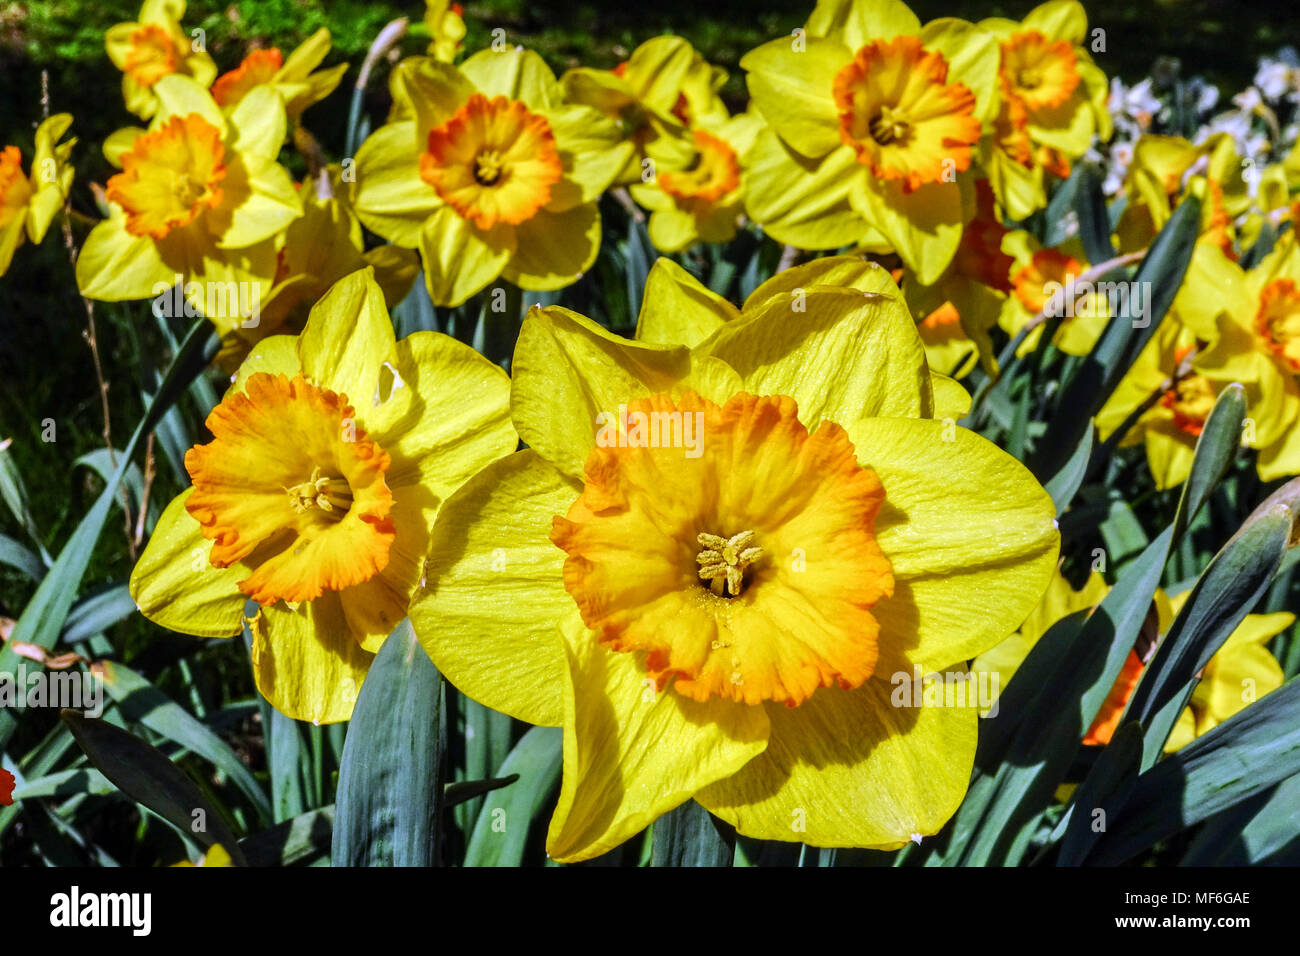 Daffodils, Narcissus Delibes, Daffodil Stock Photo